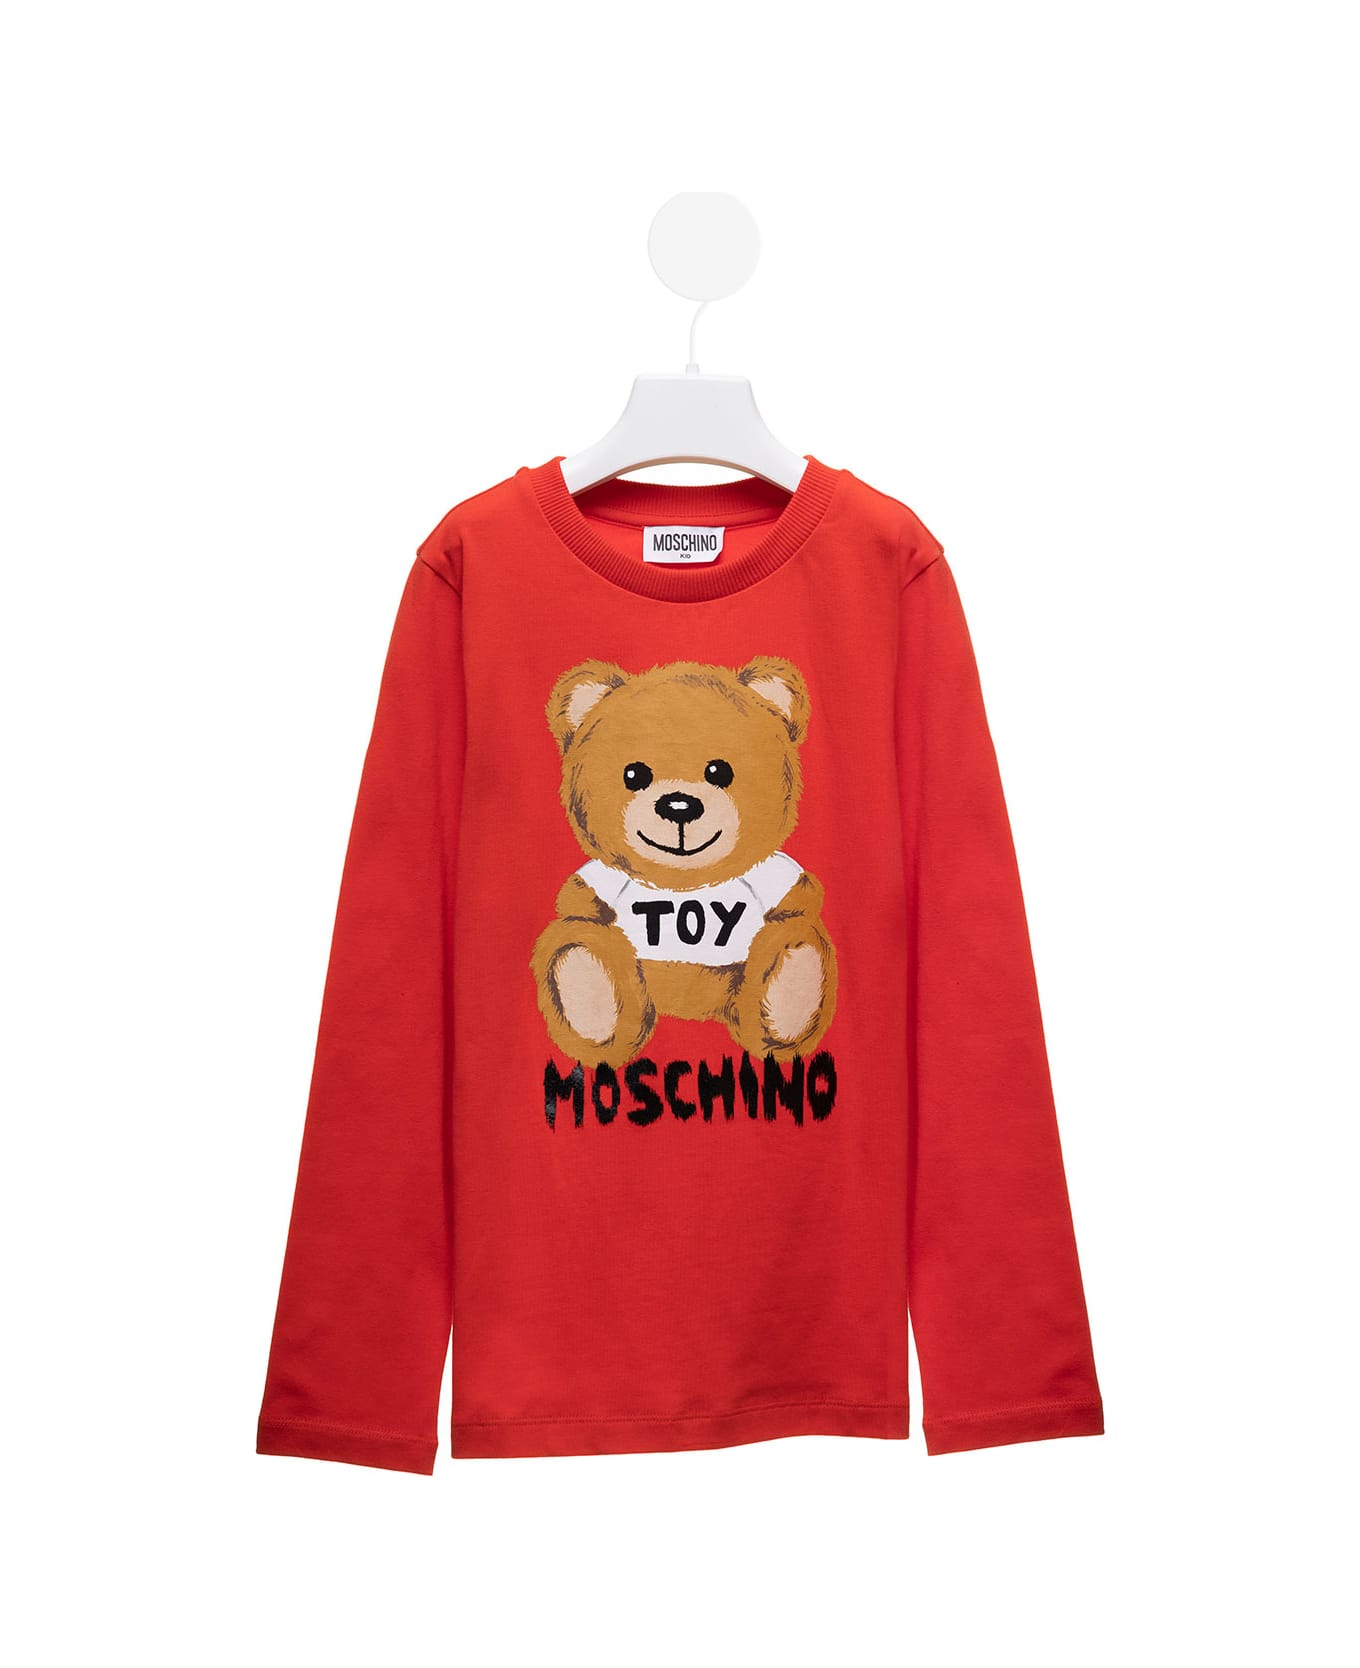 Moschino Addition Red Cotton Long Sleeved T-shirt Moschino Kids Boy - Red